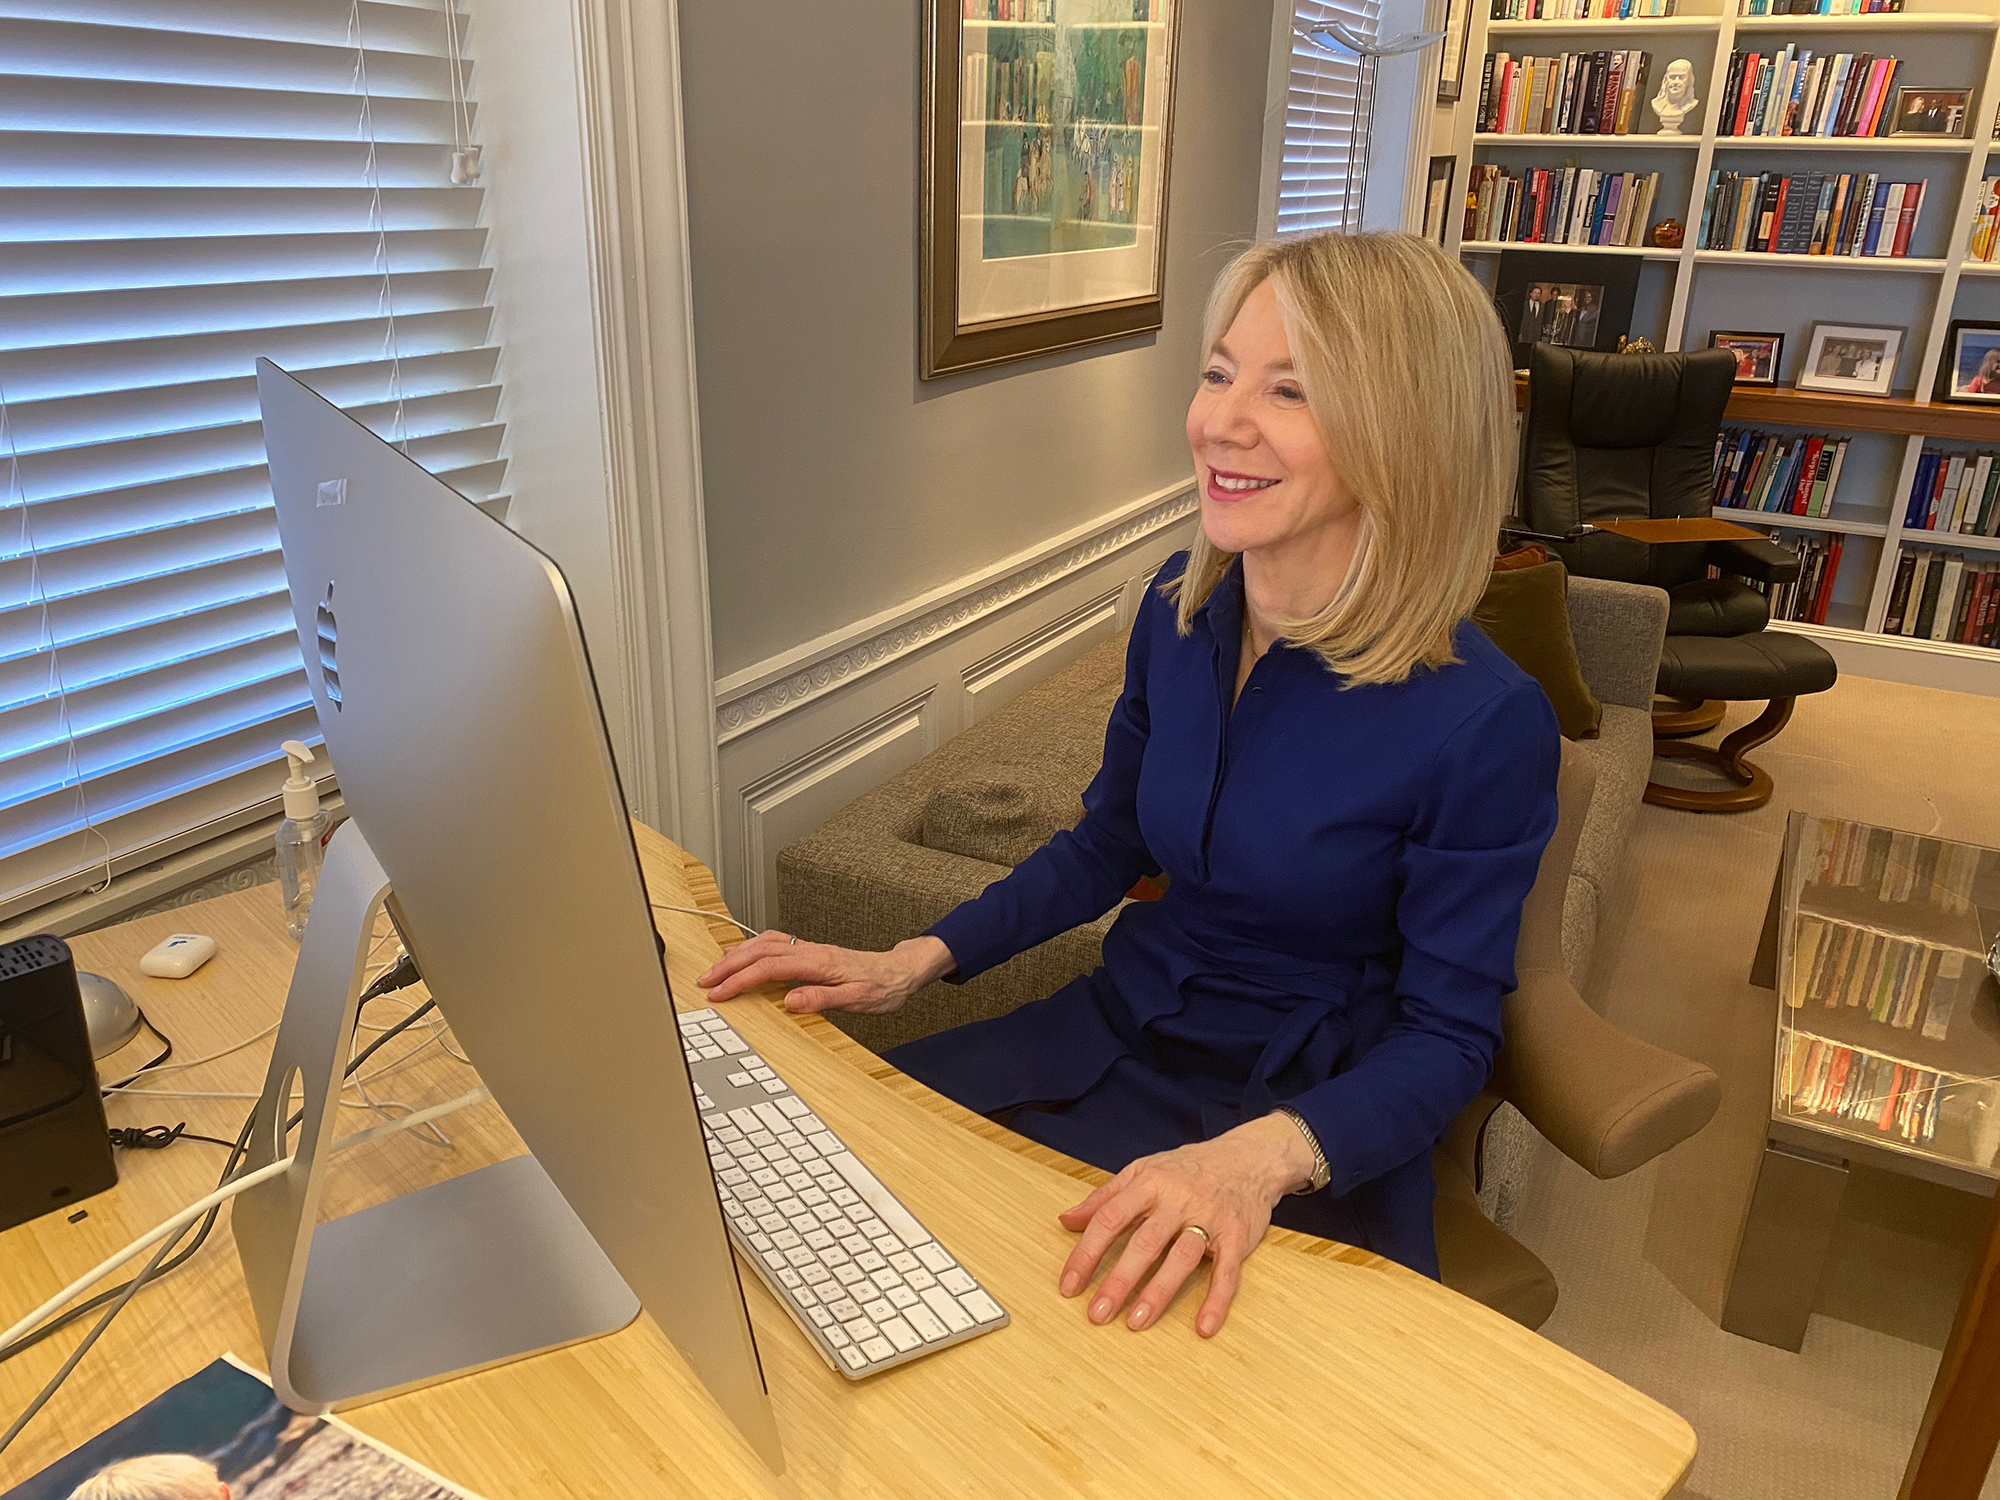 Amy Gutmann sits at her desk during a video online class which she is a guest lecturer.